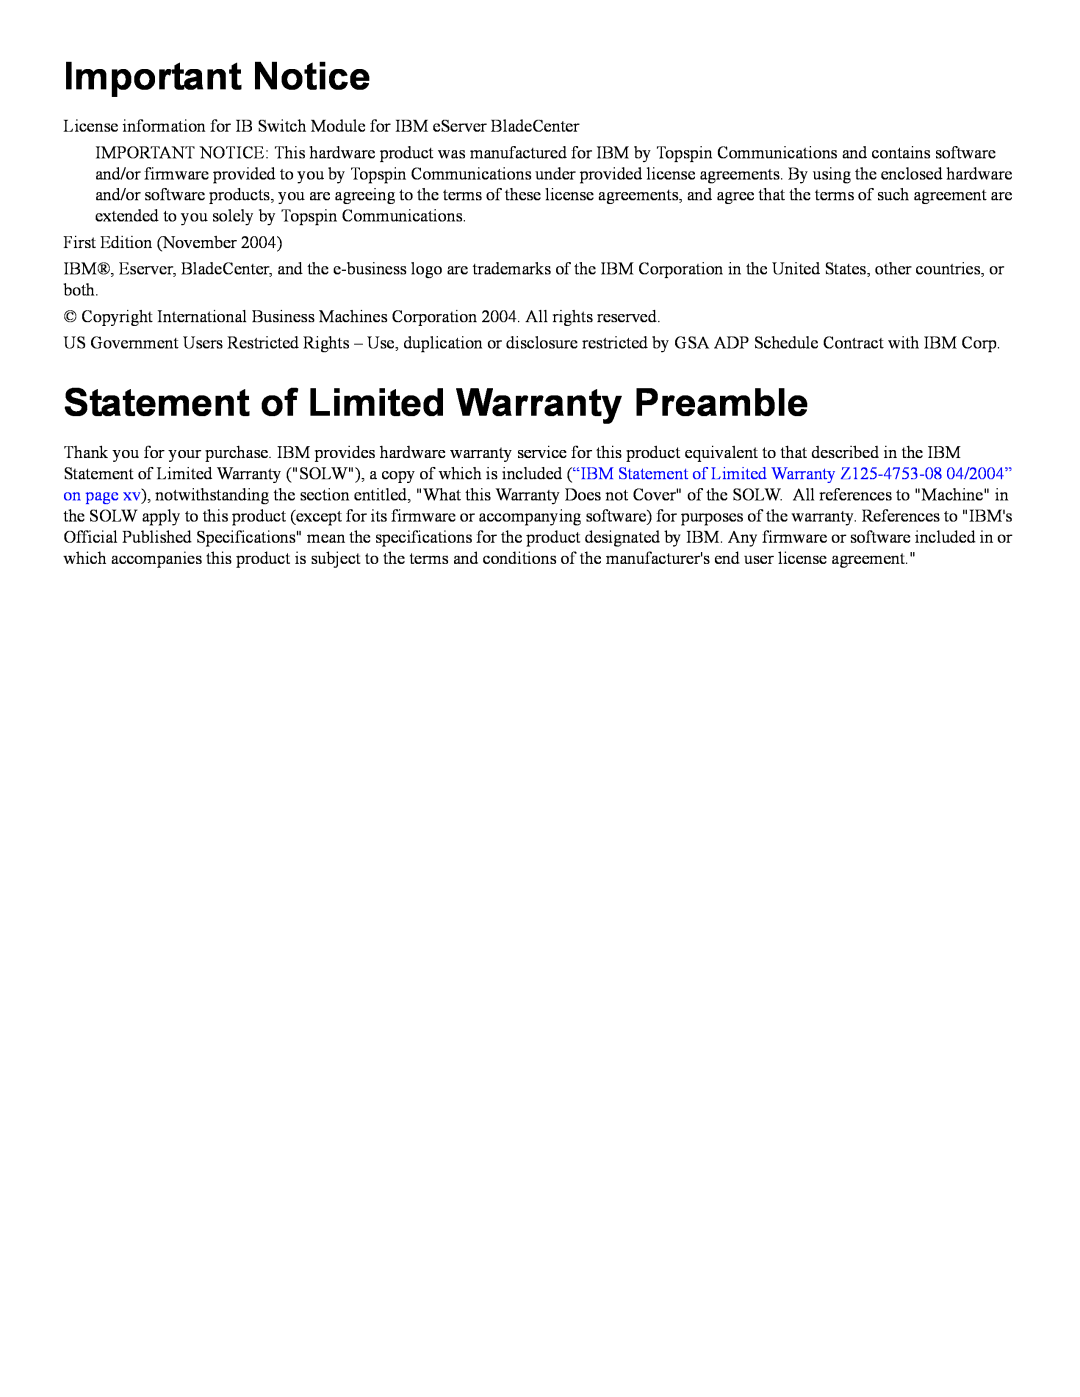 IBM 24R9718 IB manual Important Notice, Statement of Limited Warranty Preamble 